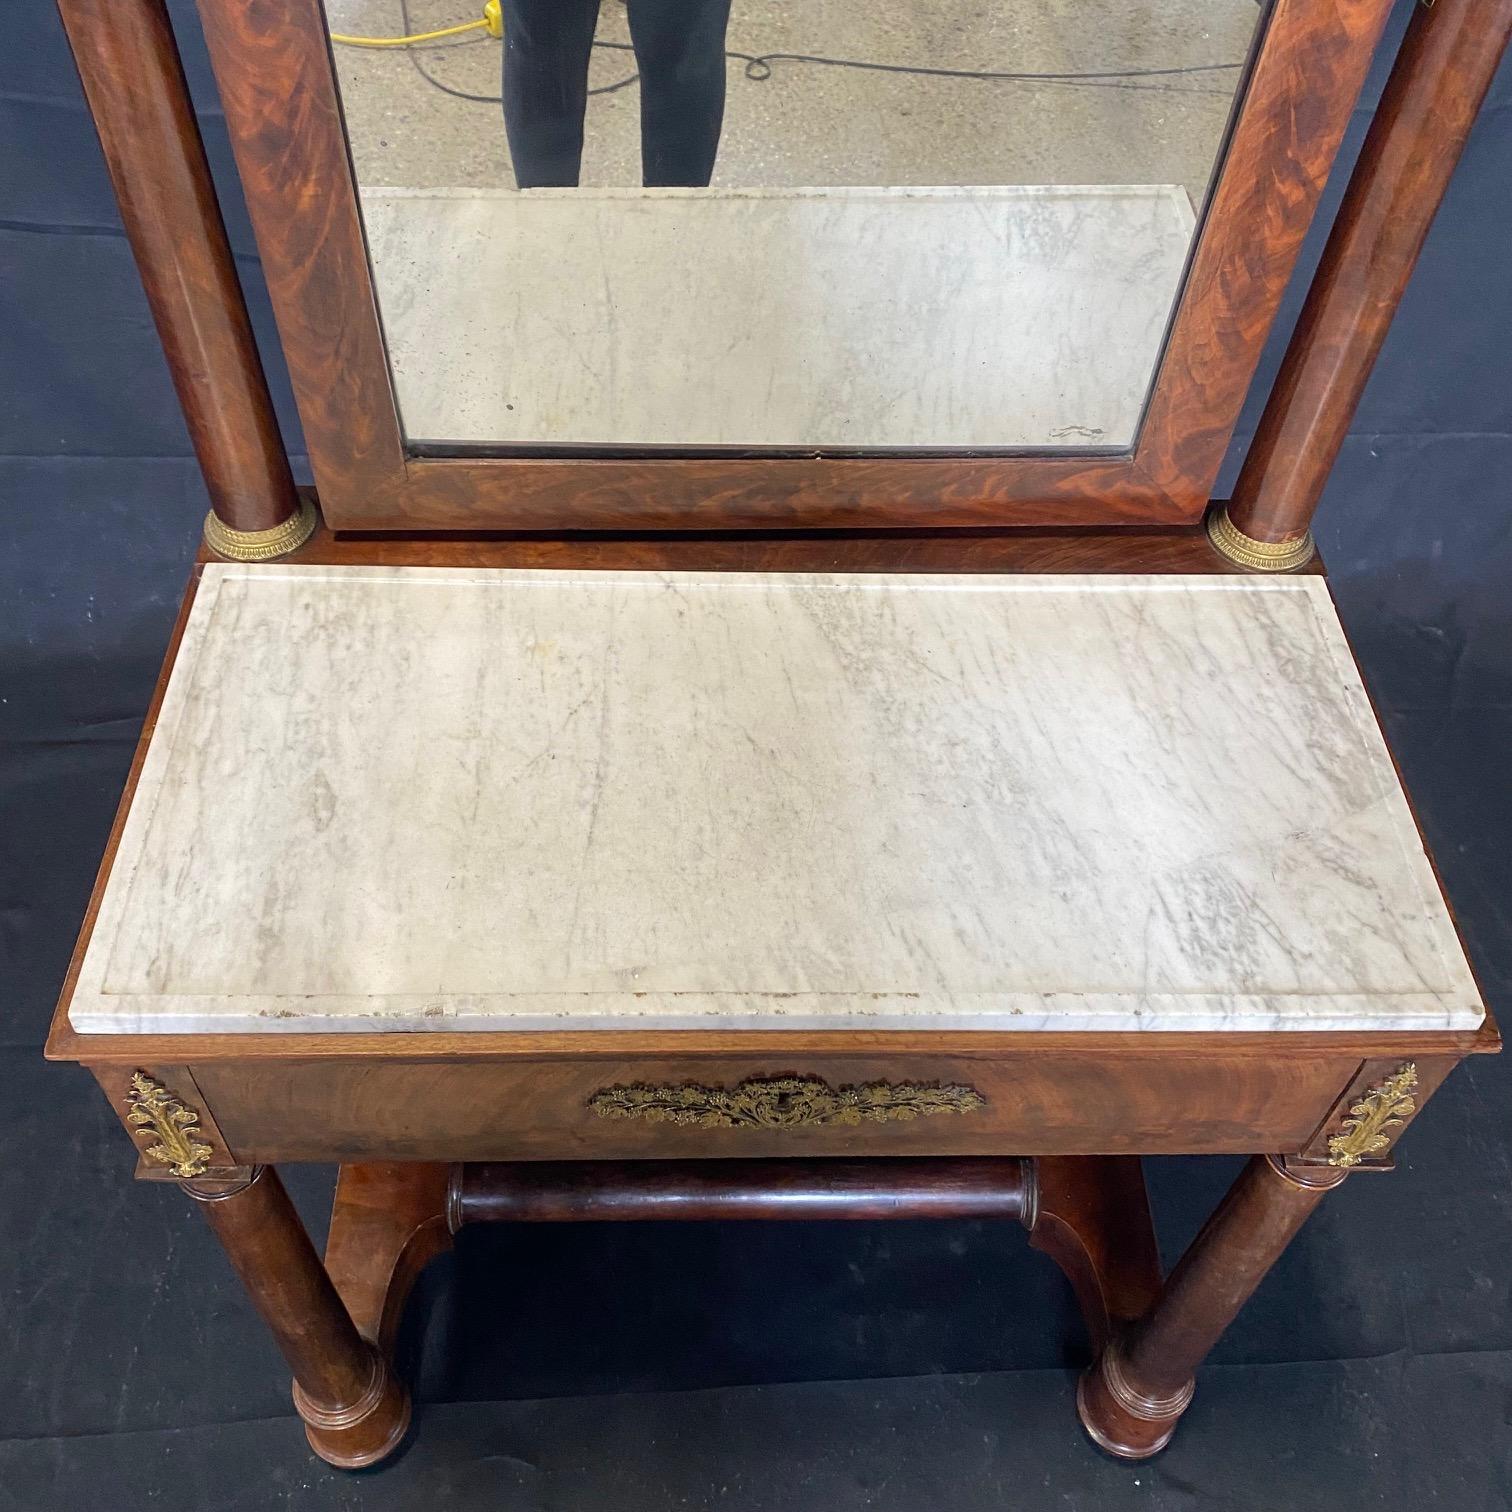 Elegant French 19th Century Empire Vanity with Original Marble Top In Good Condition For Sale In Hopewell, NJ